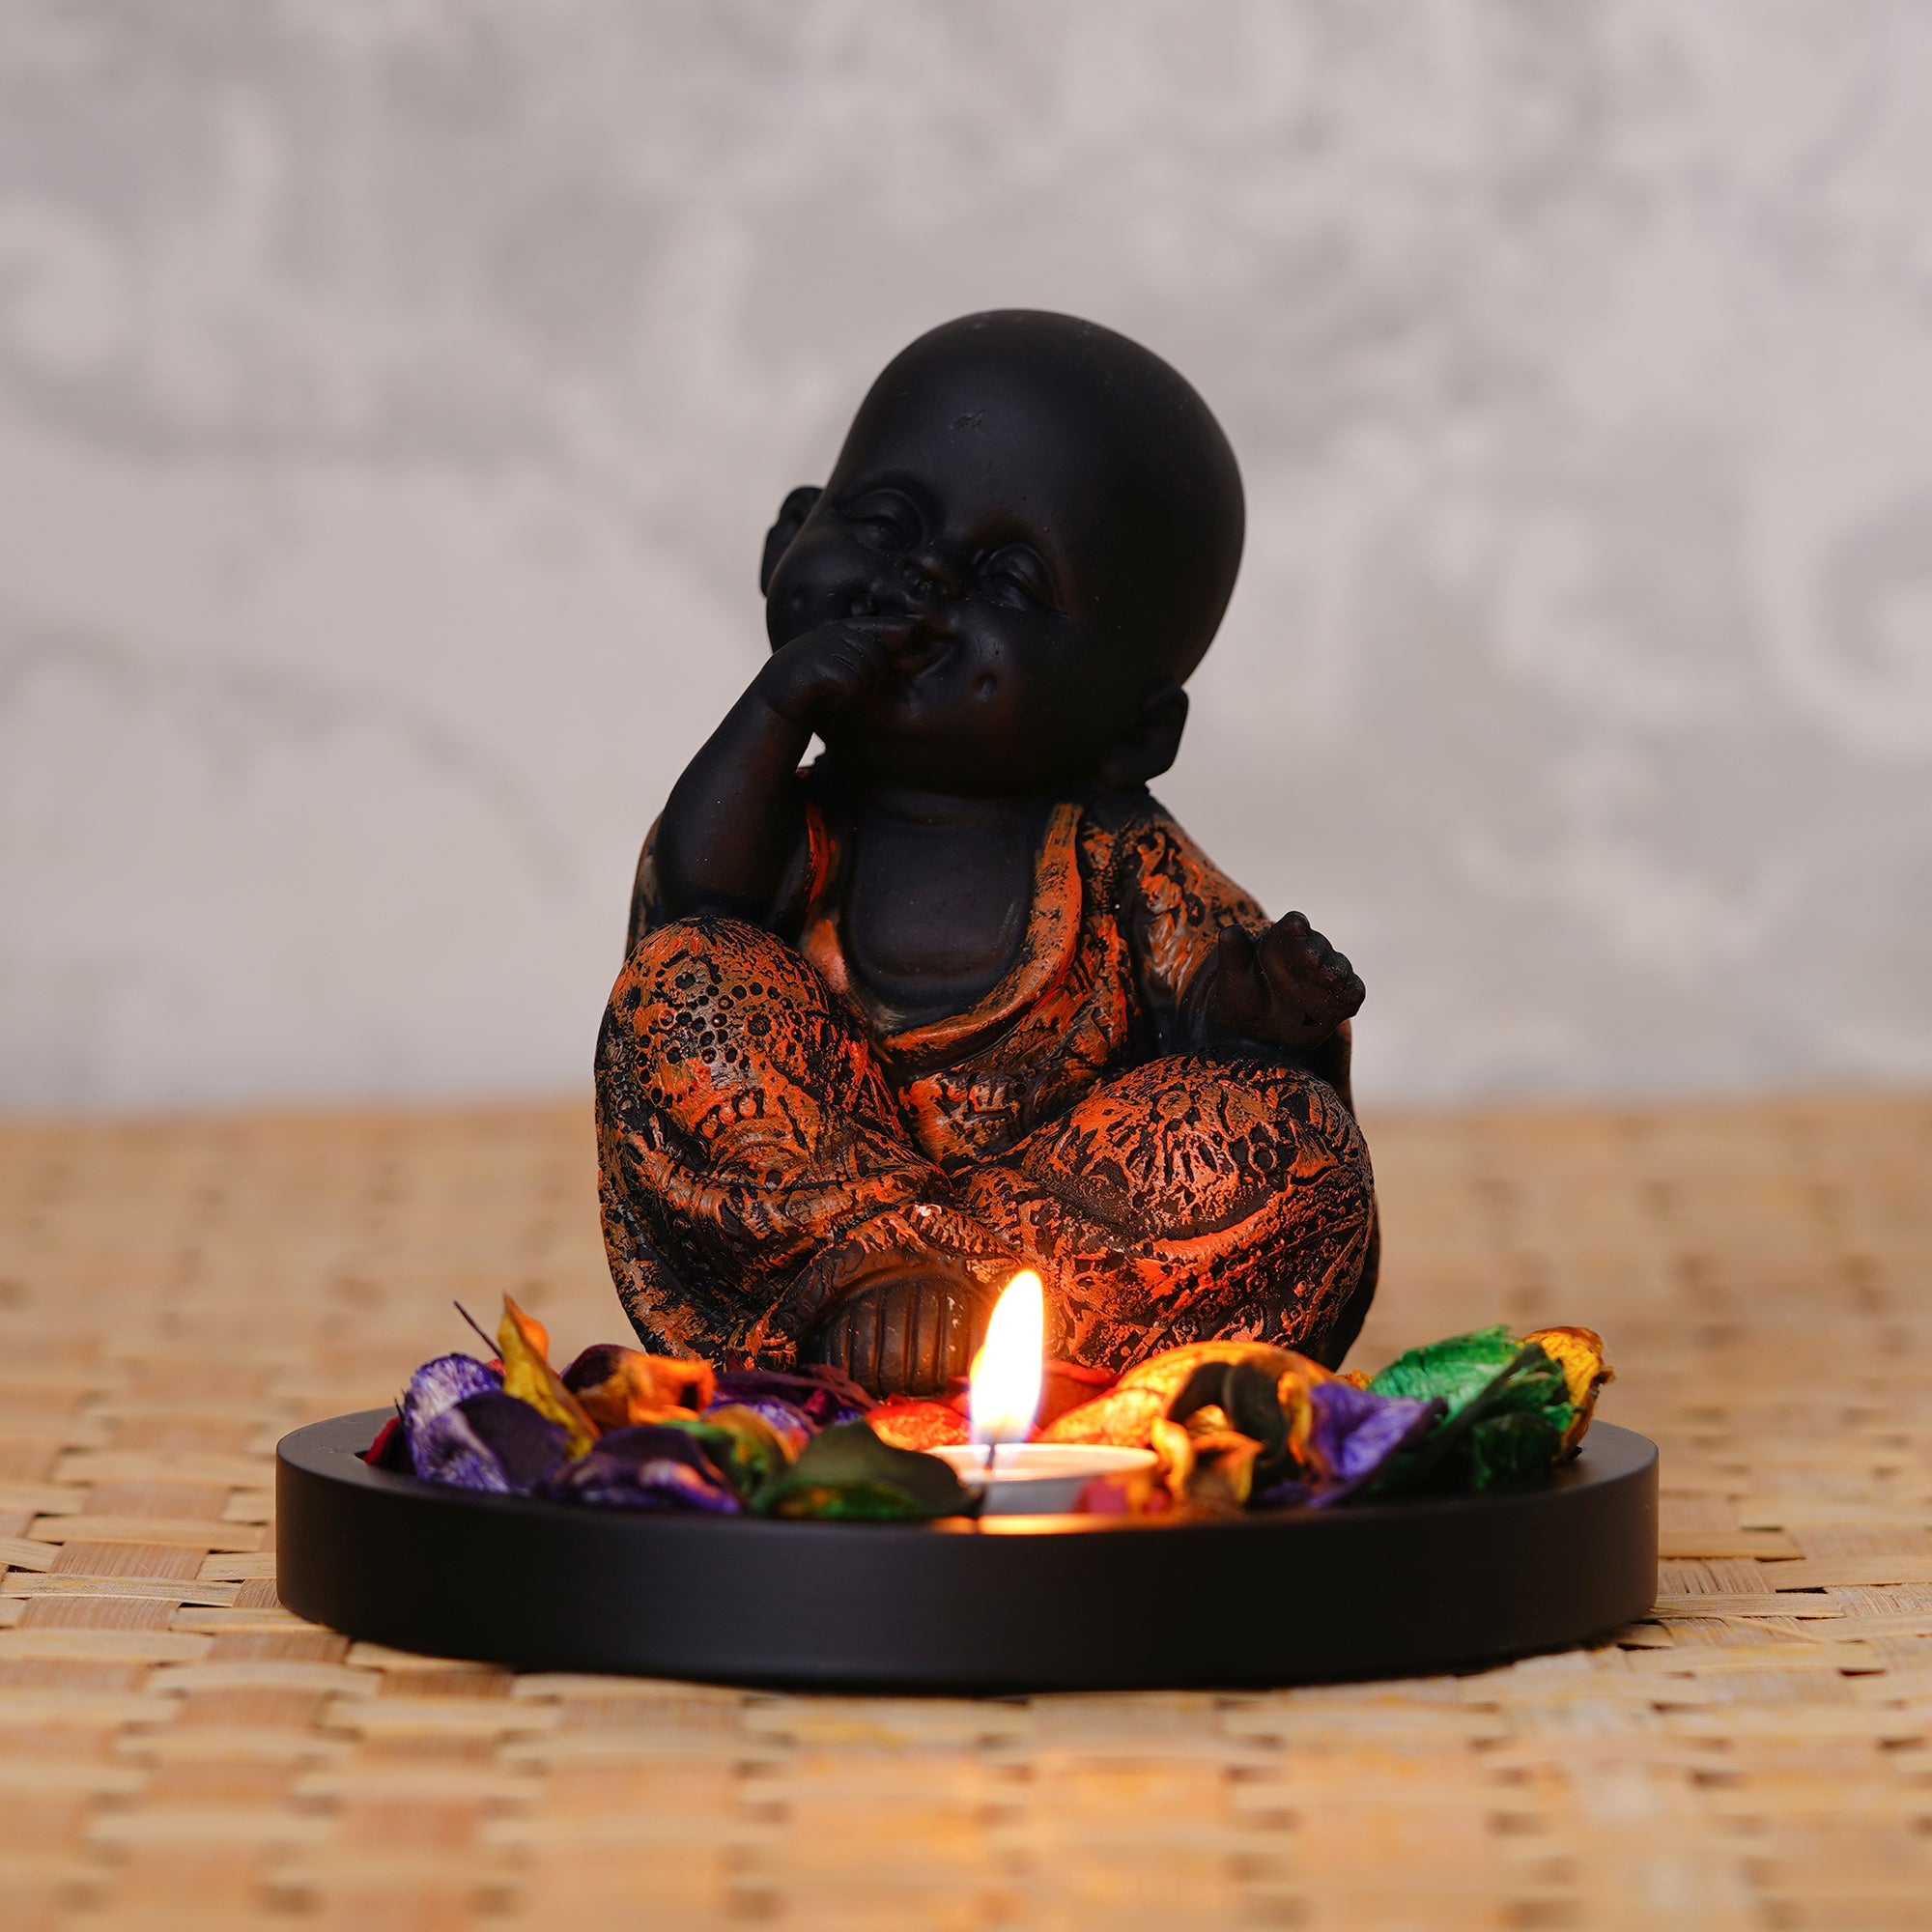 Decorative Smiling Copper Monk Buddha with Wooden Base, Fragranced Petals and Tealight